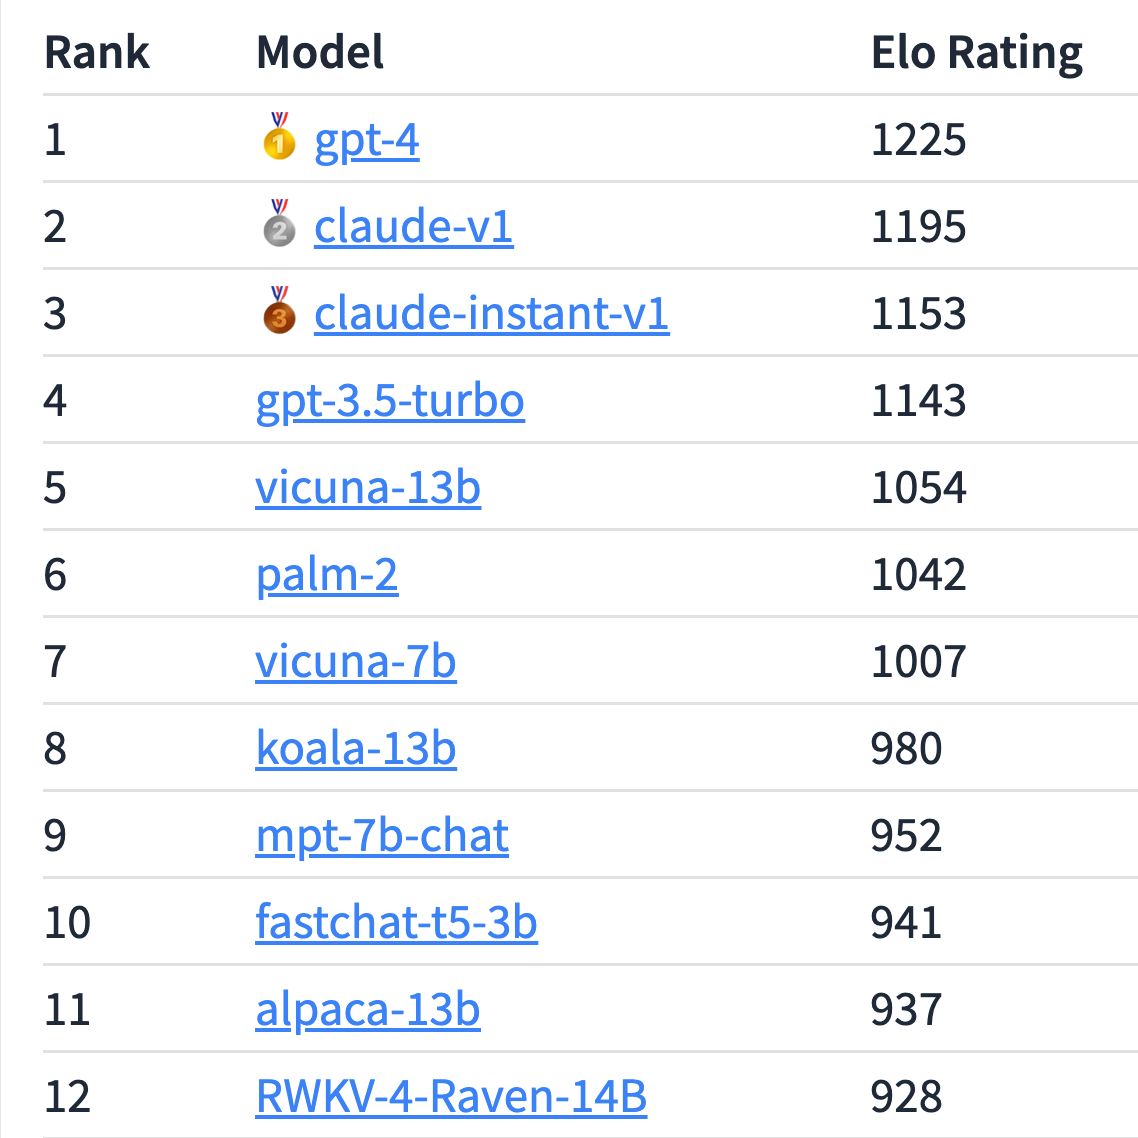 A new Elo rating leaderboard based on the 27K anonymous voting data collected in the wild between April 24 and May 22, 2023 is released in Table 1 bel